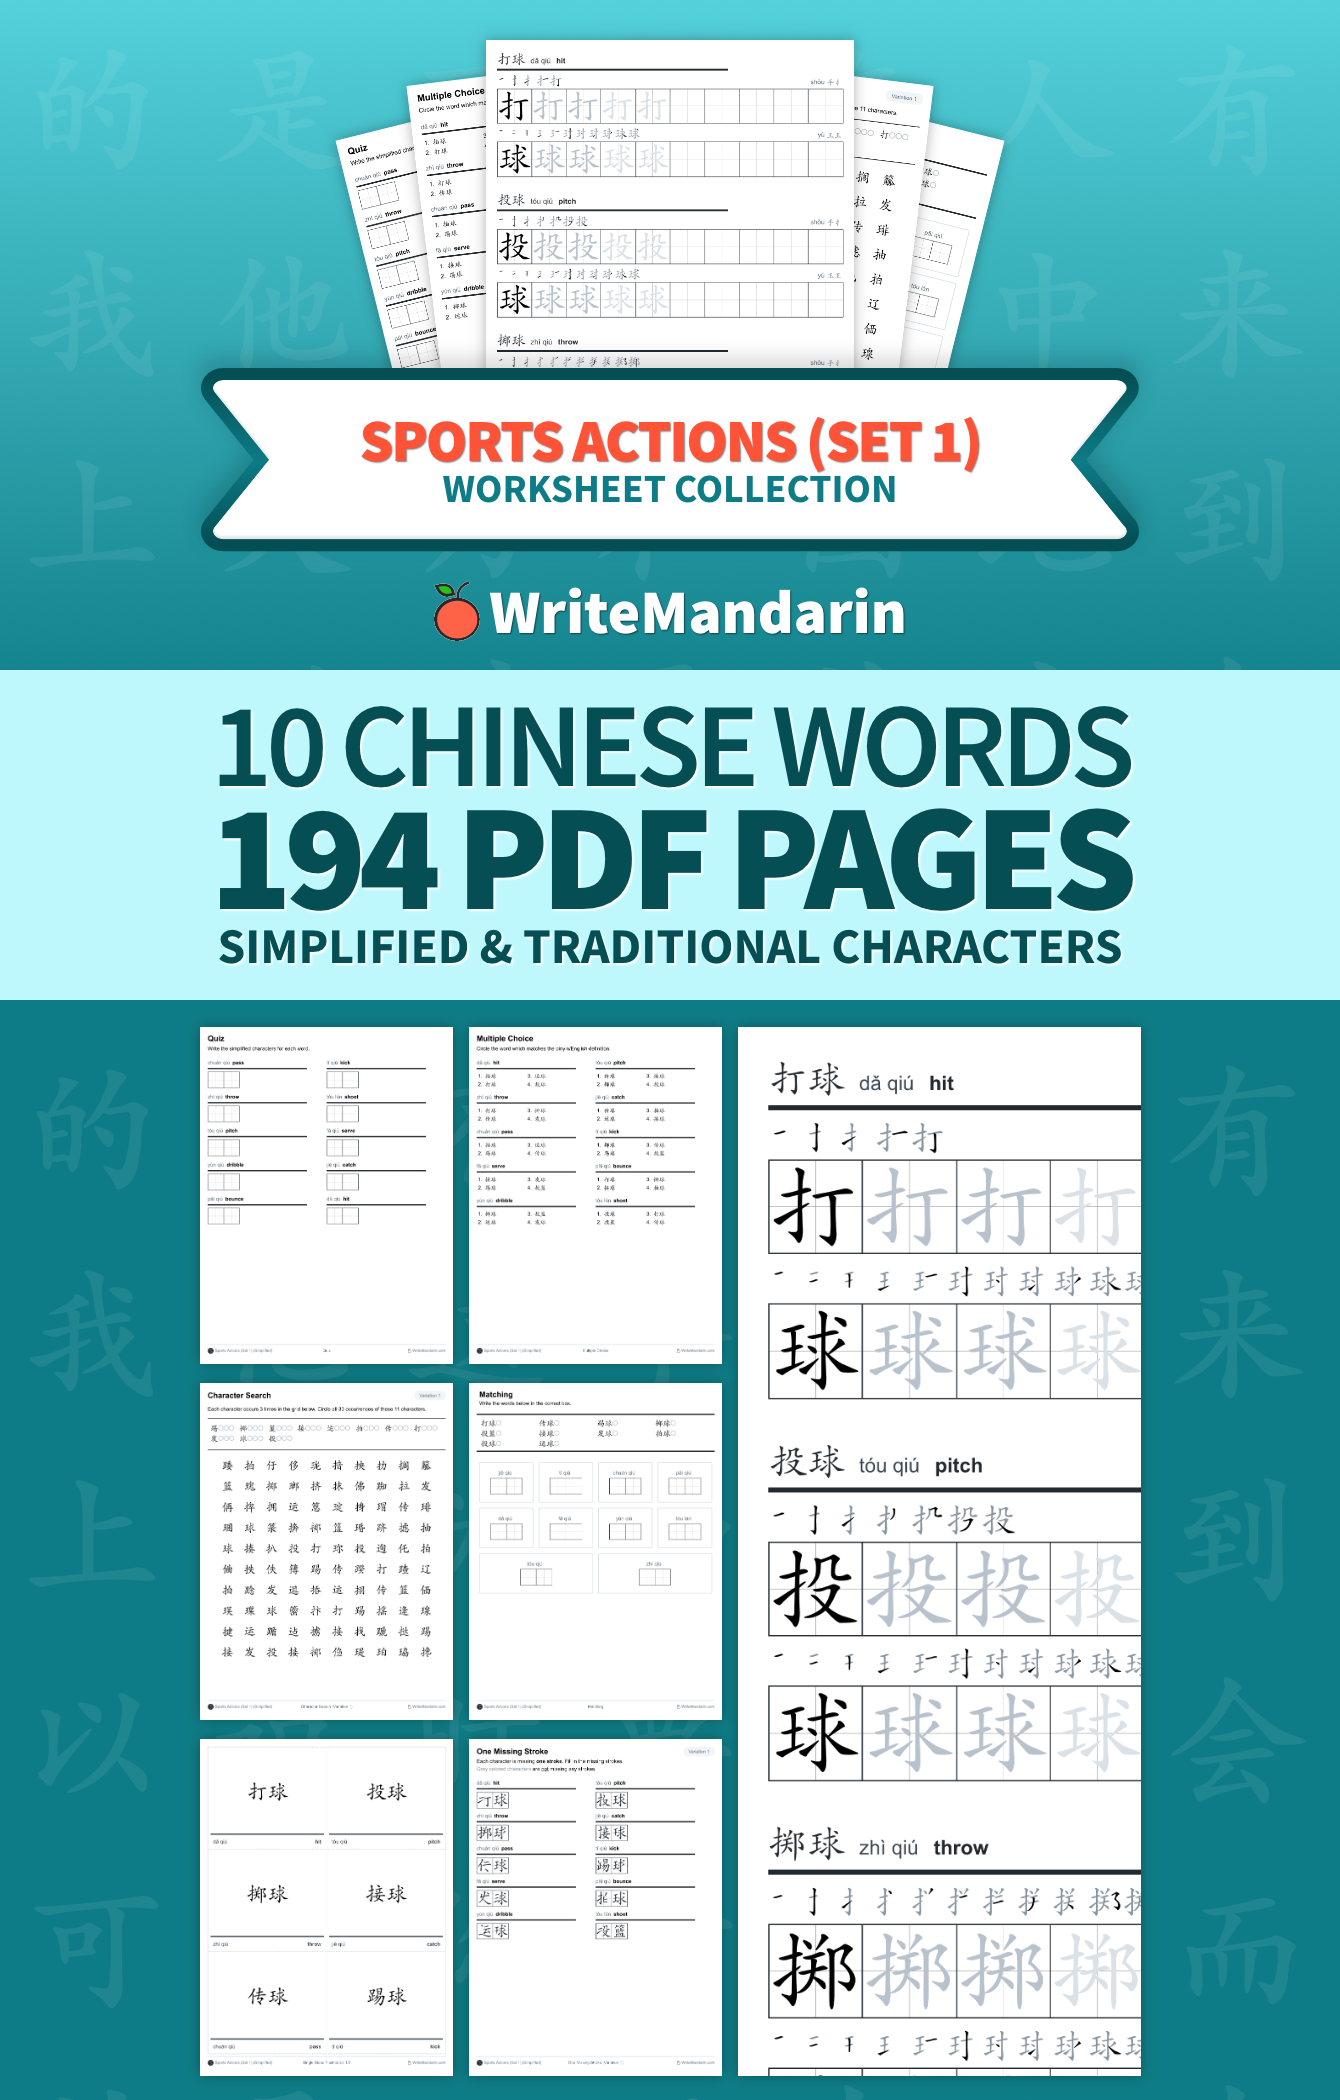 Preview image of Sports Actions (Set 1) worksheet collection